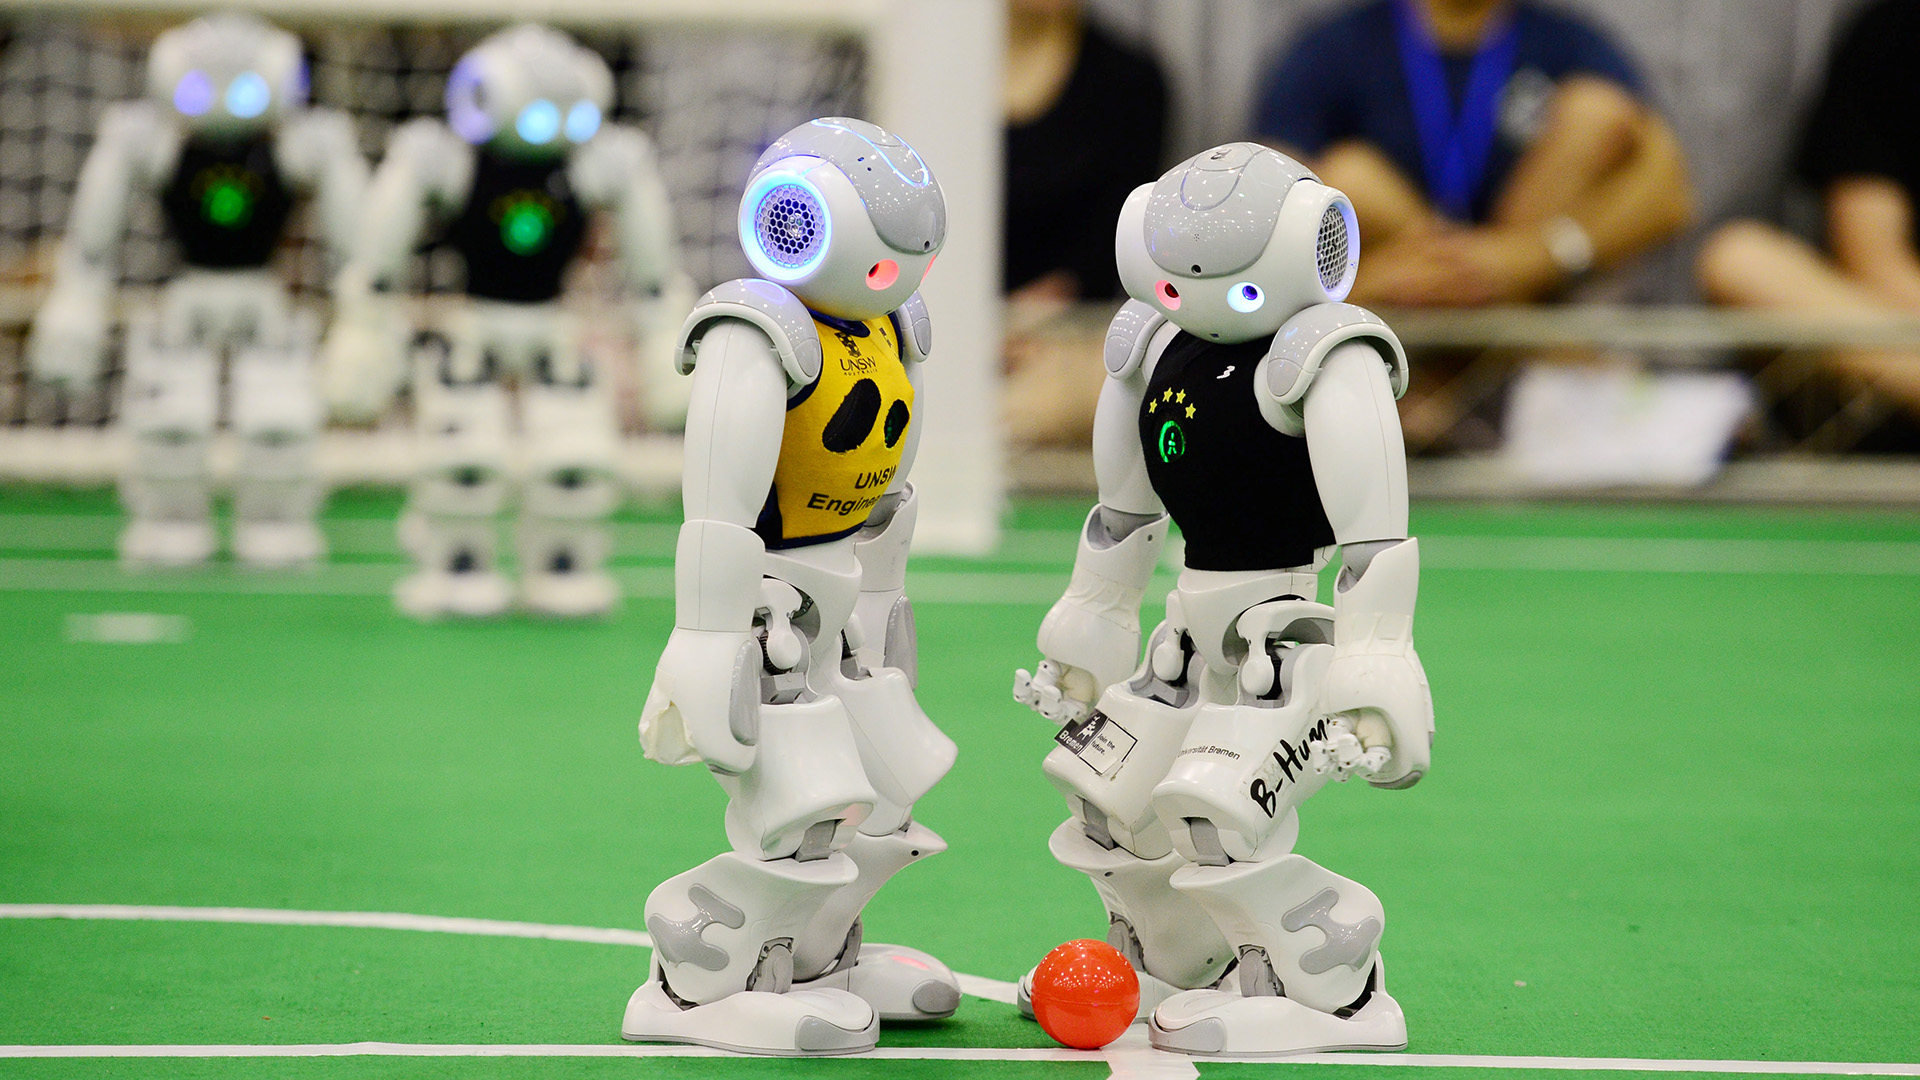 Mandatory Credit: Photo by Shutterstock (4913994d)Robots of Australian team UNSW (University of New South Wales) in yellow and German team B-Human competeRoboCup football competition, International Expo Center, Hefei, Anhui Province, China - 22 Jul 2015An Australian university team has been crowned robot world cup champions on Wednesday (22 July 2015) at the 19th RoboCup games in China after their team of automatons battled its way to glory on the football field. The world's largest robot-focused competition saw 300 teams from 47 counties or regions participate in programming a standard 58 cm-tall robot at the games in Hefei city, capital of east China's Anhui province. Once the competition starts, the robots are on their own, with the teams not allowed to interfere with the programming. In the end, New South Wales University triumphed over German team B-Human 3-1 in the final to be crowned 2015 RoboCup champions.